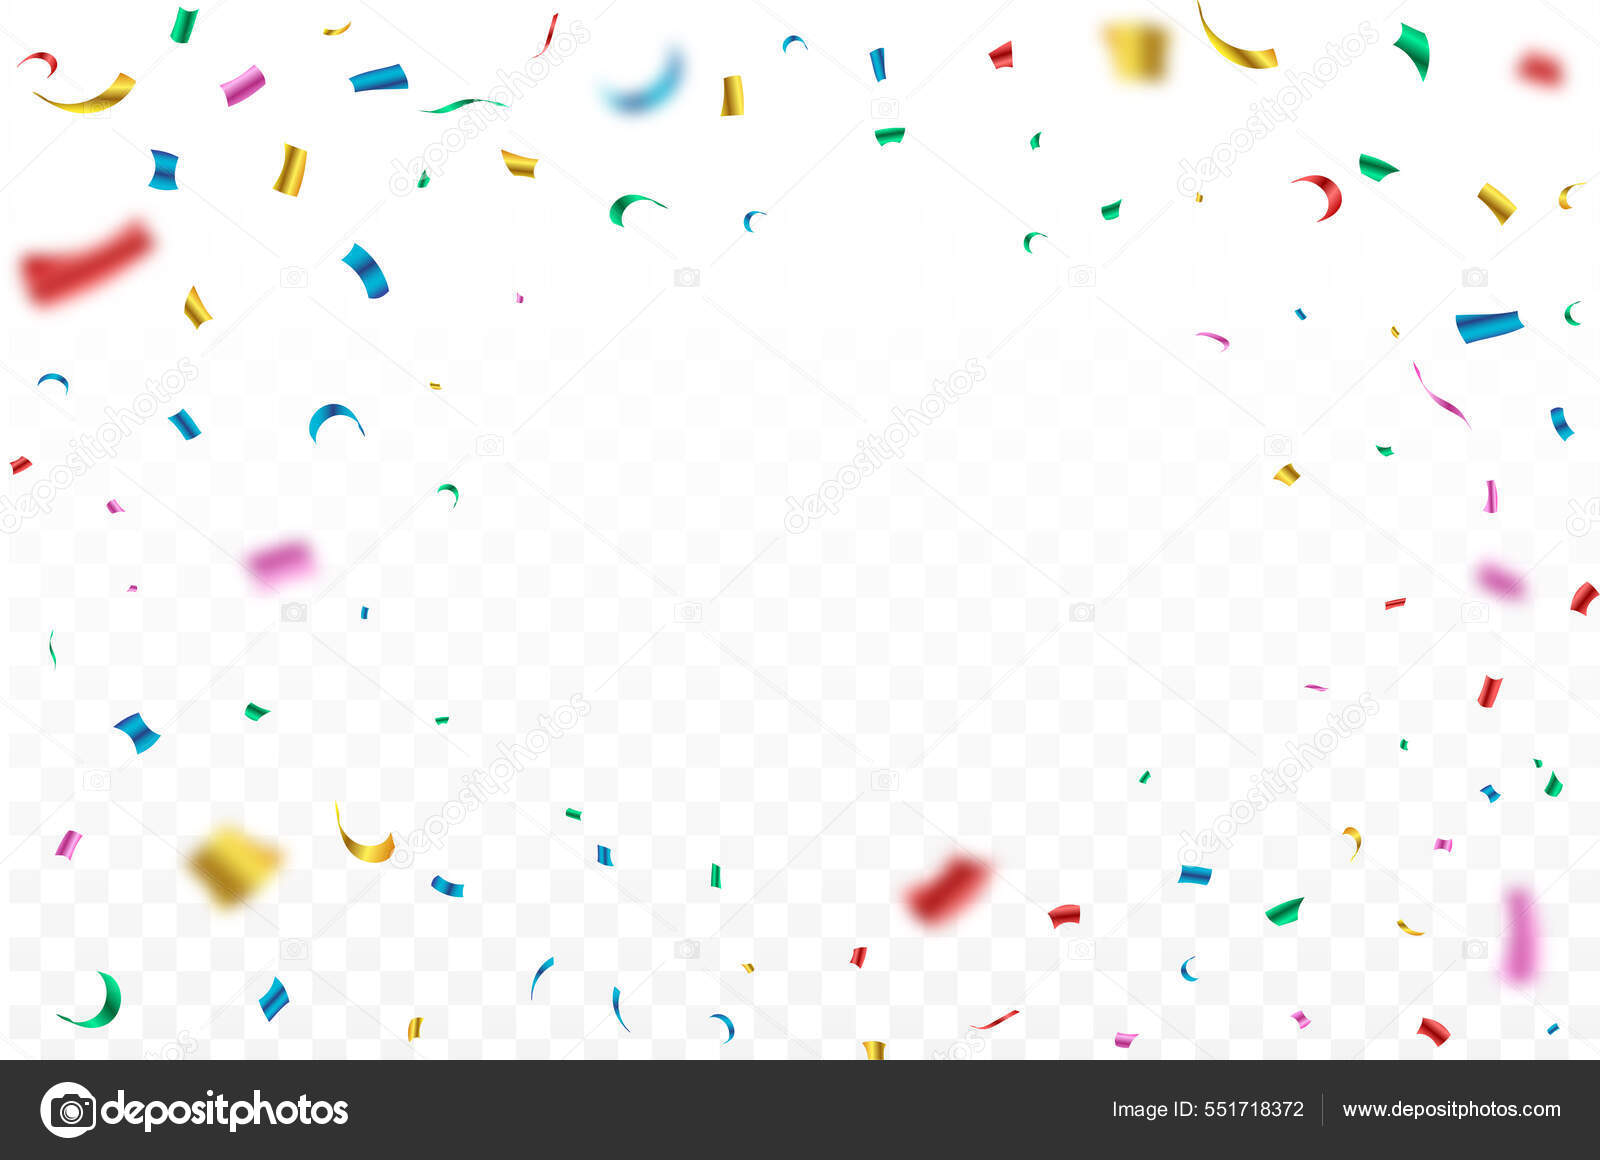 Confetti illustration for the festival background. Colorful party